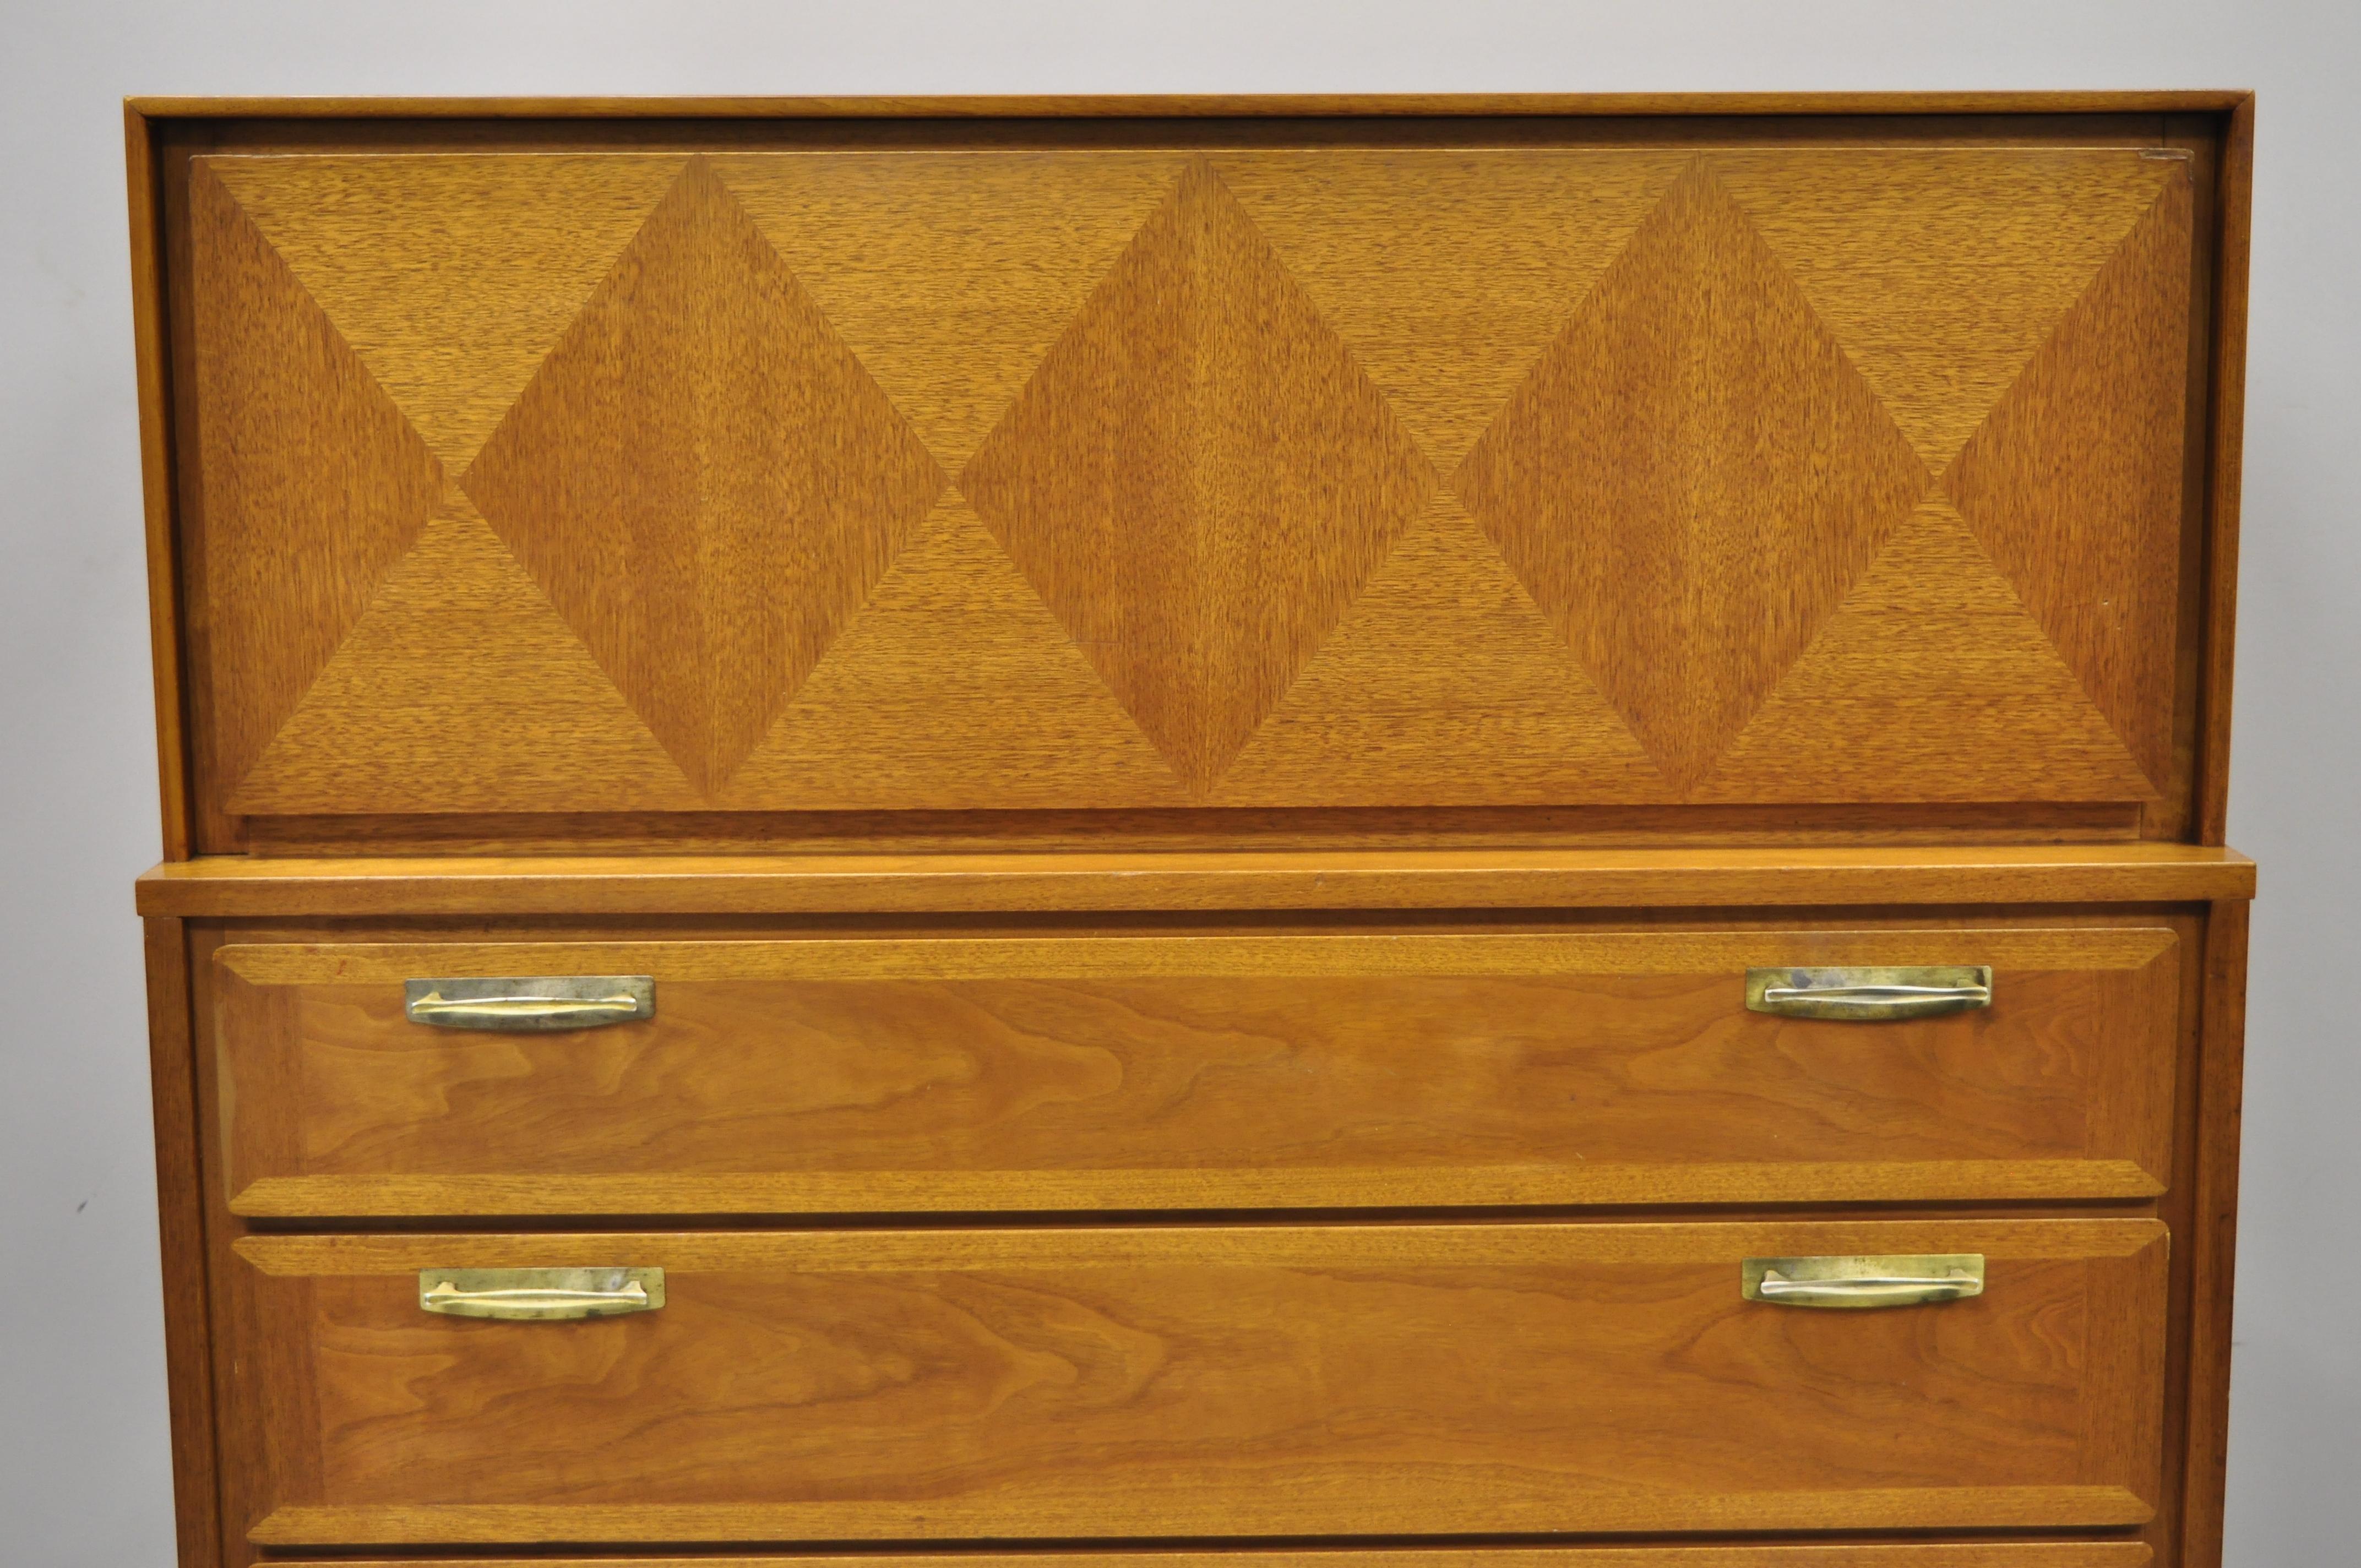 Vintage Mid-Century Modern diamond inlay walnut chest dresser by Red Lion. Item includes drop down lid, beautiful wood grain, 5 dovetailed drawers, tapered legs, solid brass hardware, nice inlay, banded details, circa mid-20th century. Measurements: